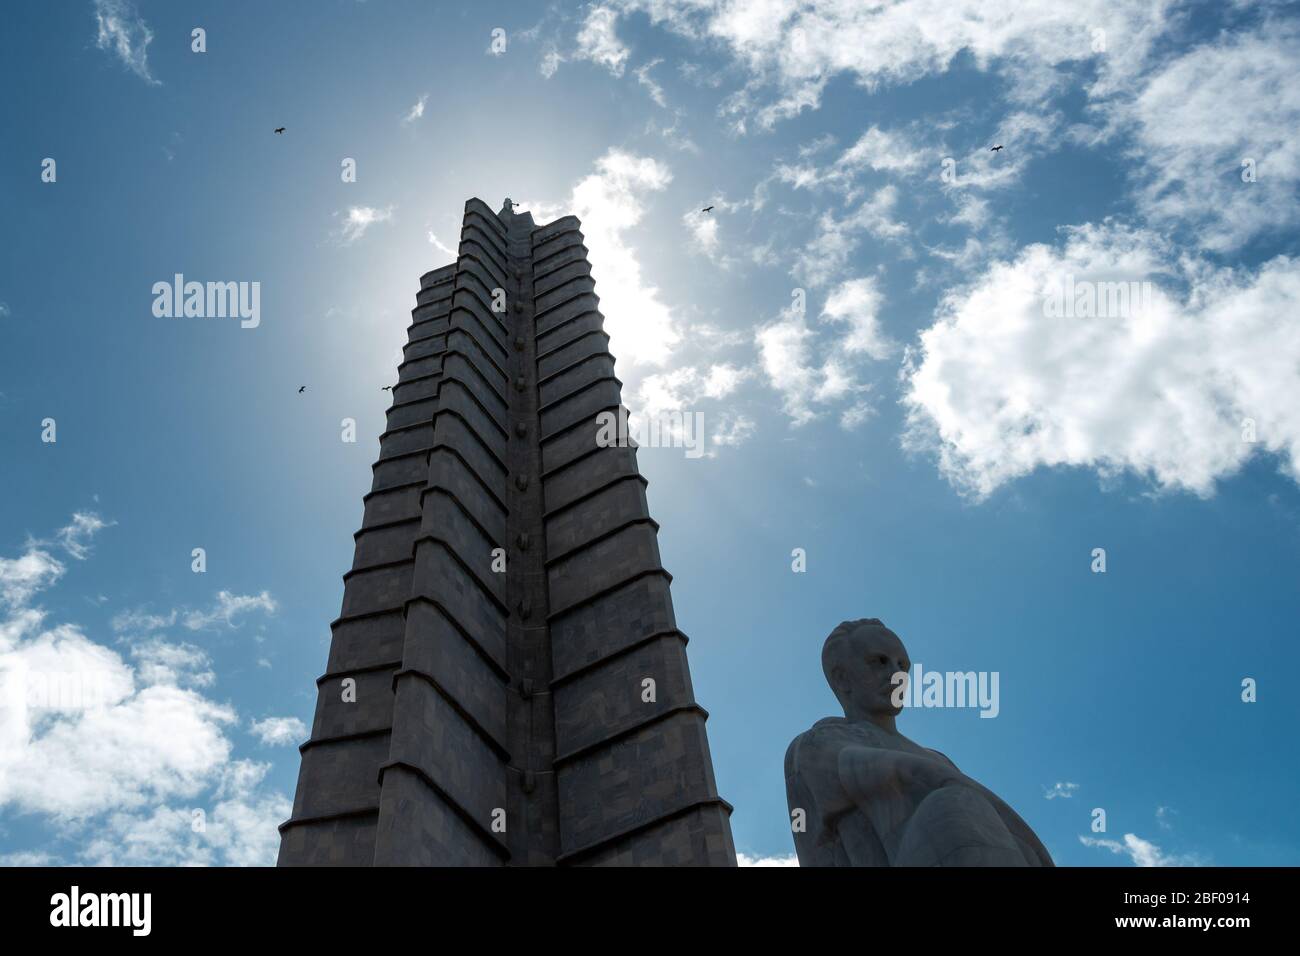 Urban wildlife: Looking up the José Martí Memorial tower with turkey vultures (Cathartes aura) circling the op of the monument, Havana, Cuba Stock Photo